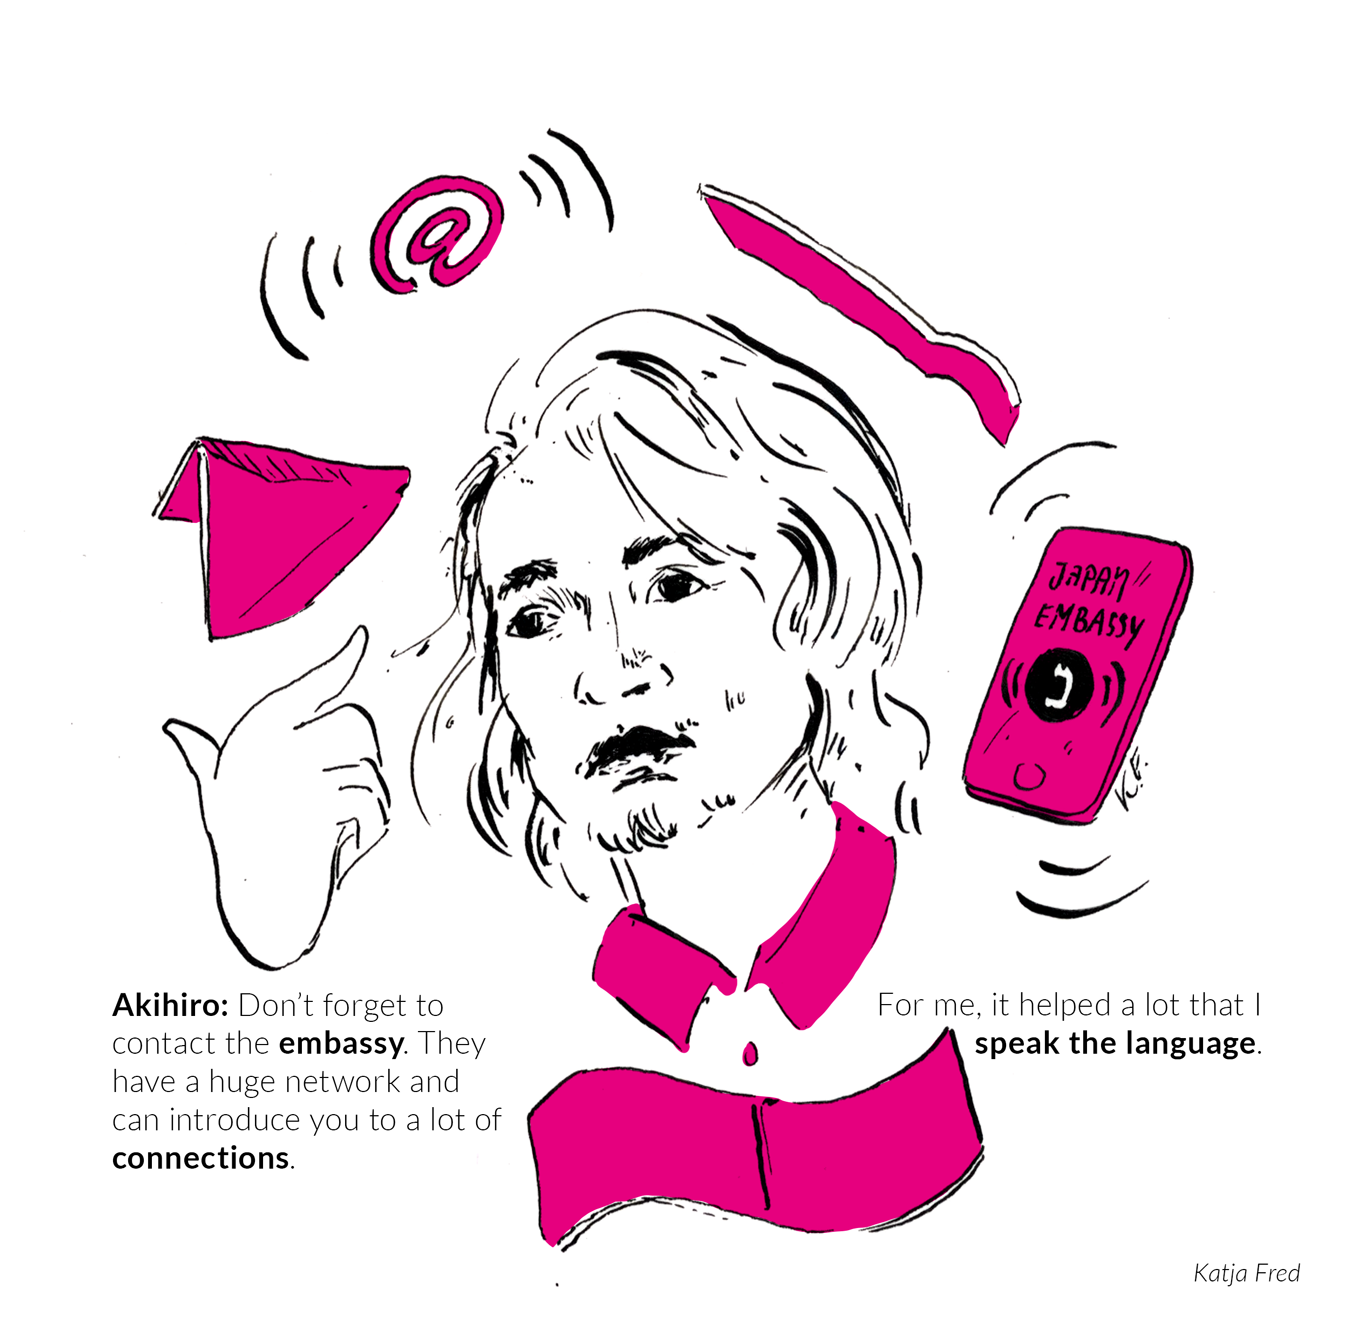 Illustration of Akihiro surrounded by materials and a phone. With the tip: contact the embassy, they have a huge network and many connections.